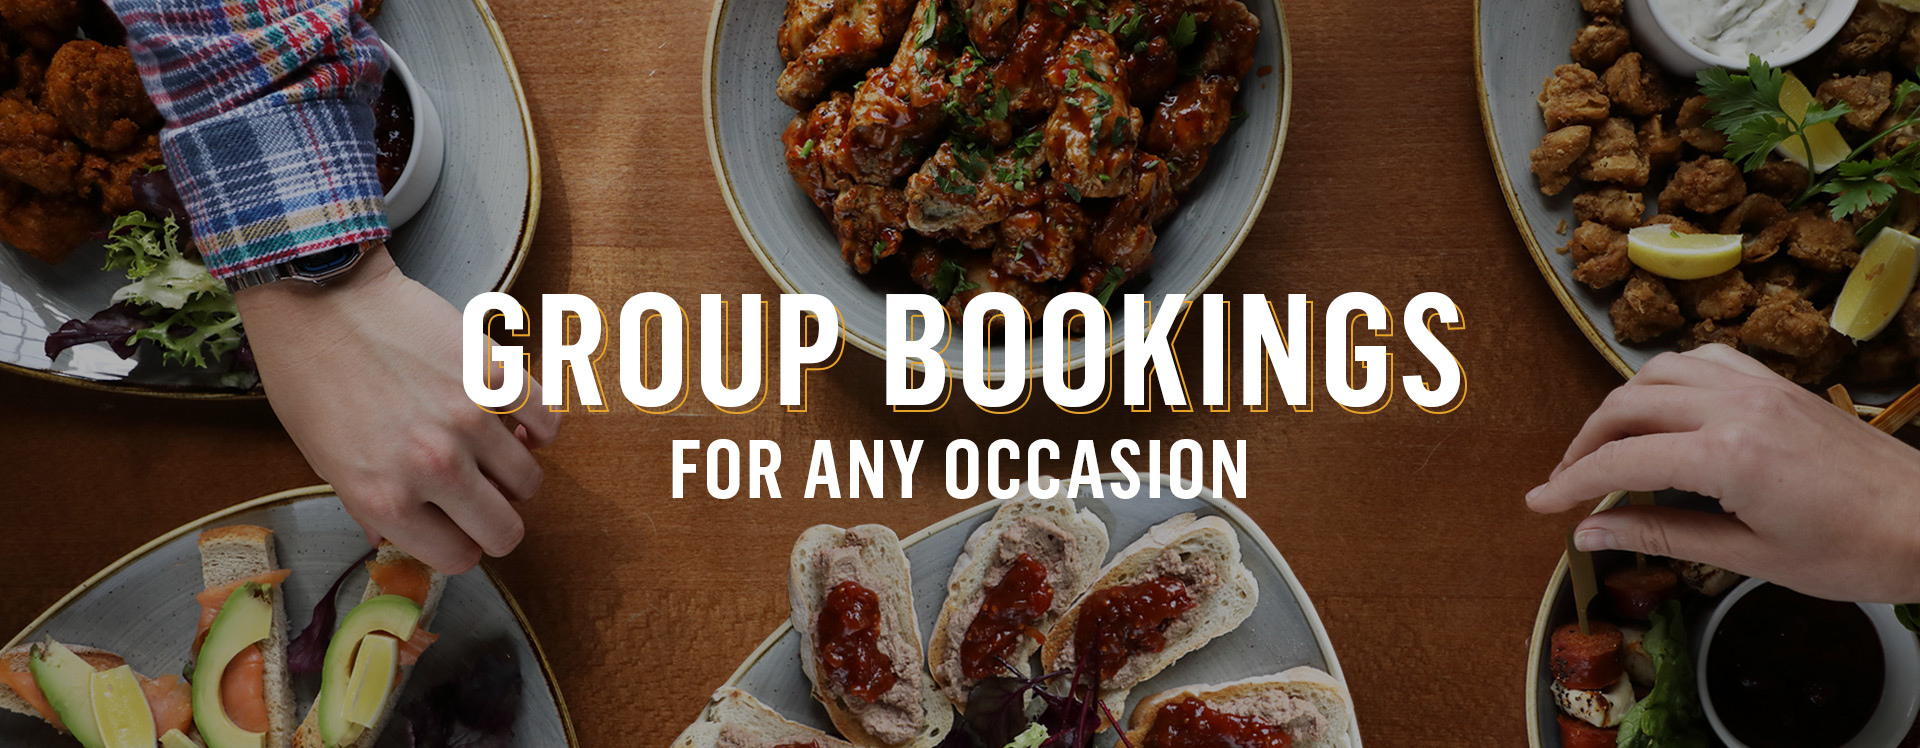 Group Bookings at The Carpenter's Arms